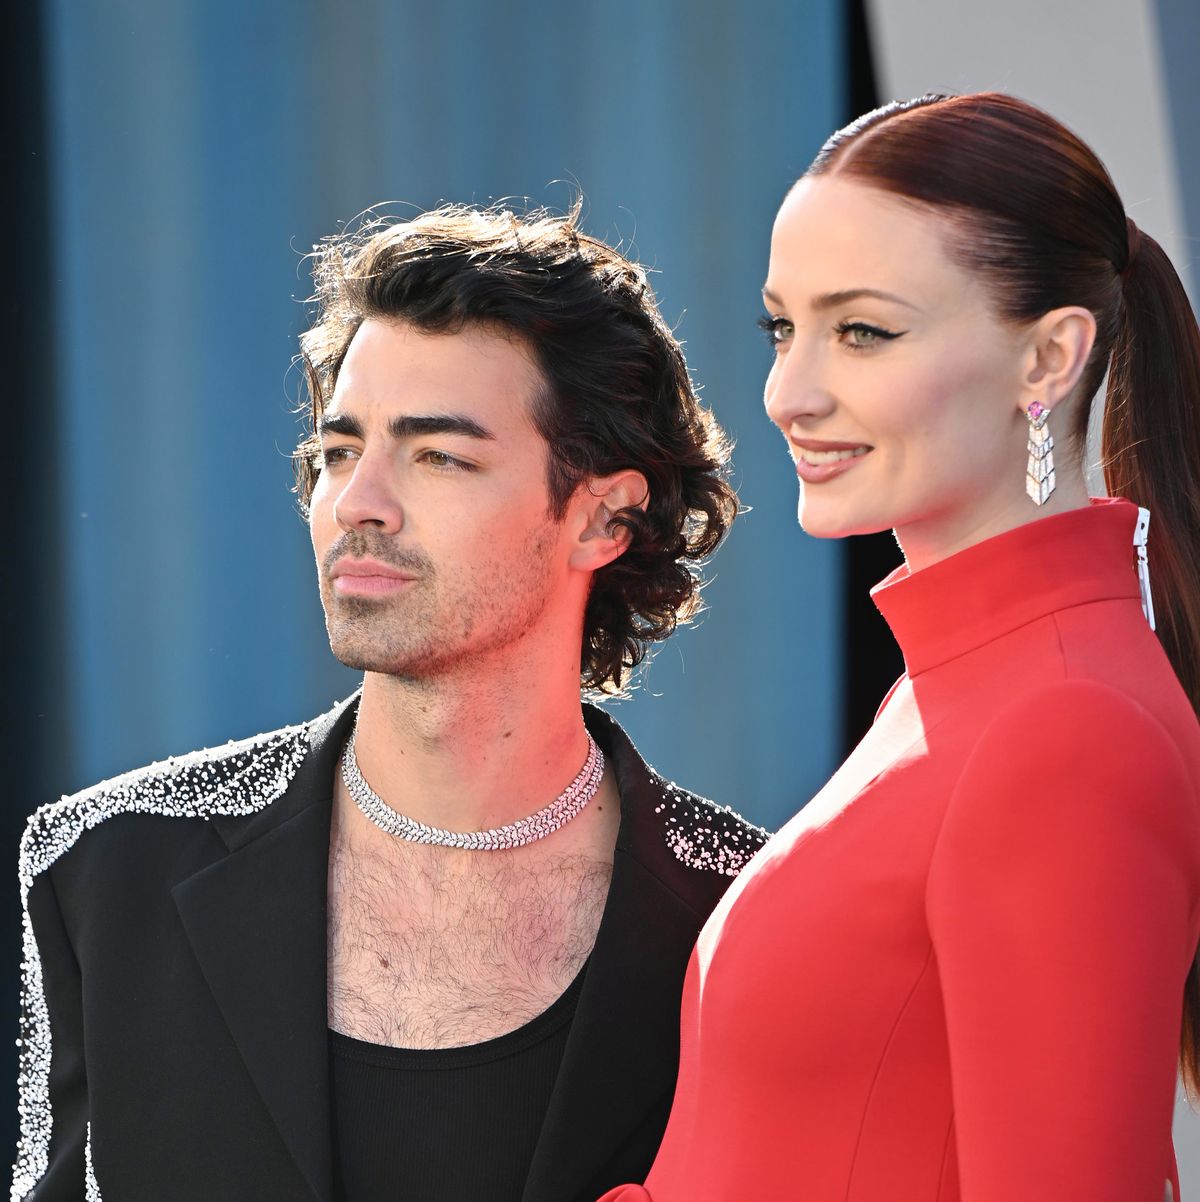 Joe Jonas Shares New Pic Of Sophie Turner After Birth Of Baby Girl